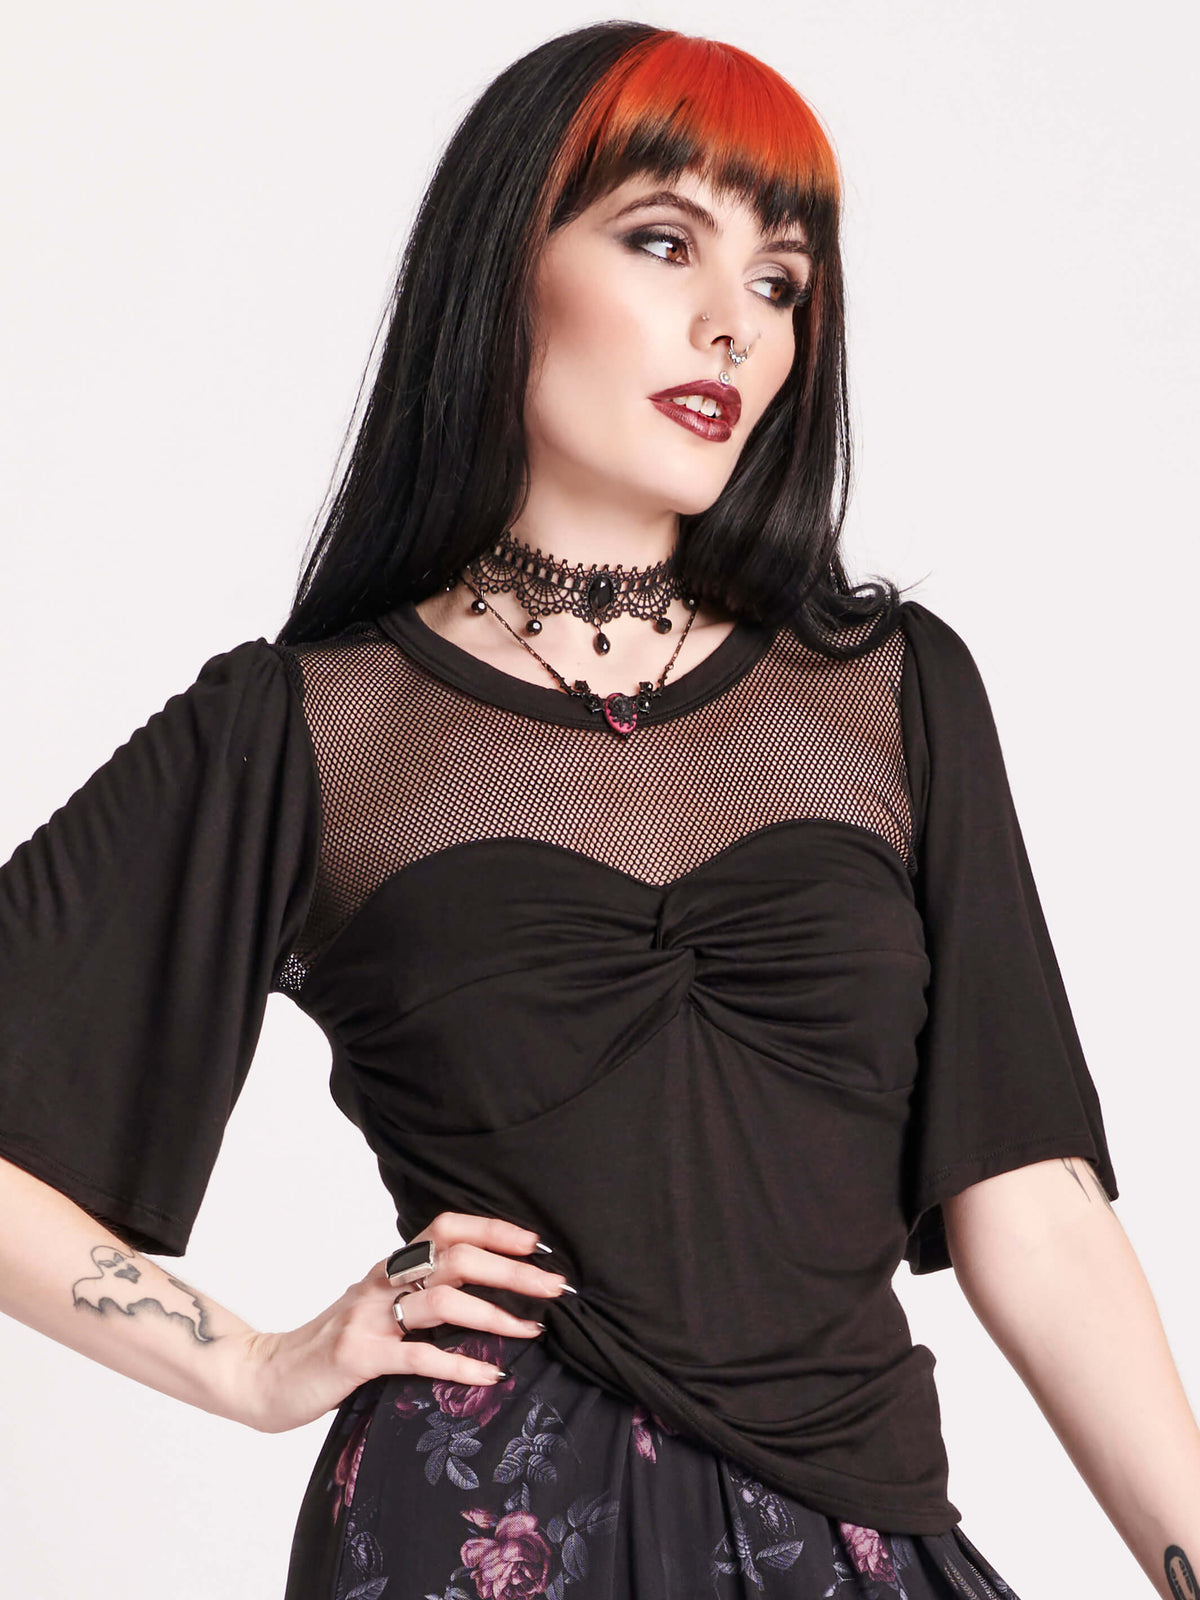 ELBOW LENGTH SLEEVES, MESH YOKE AND KNOTTED FRONT DETAIL